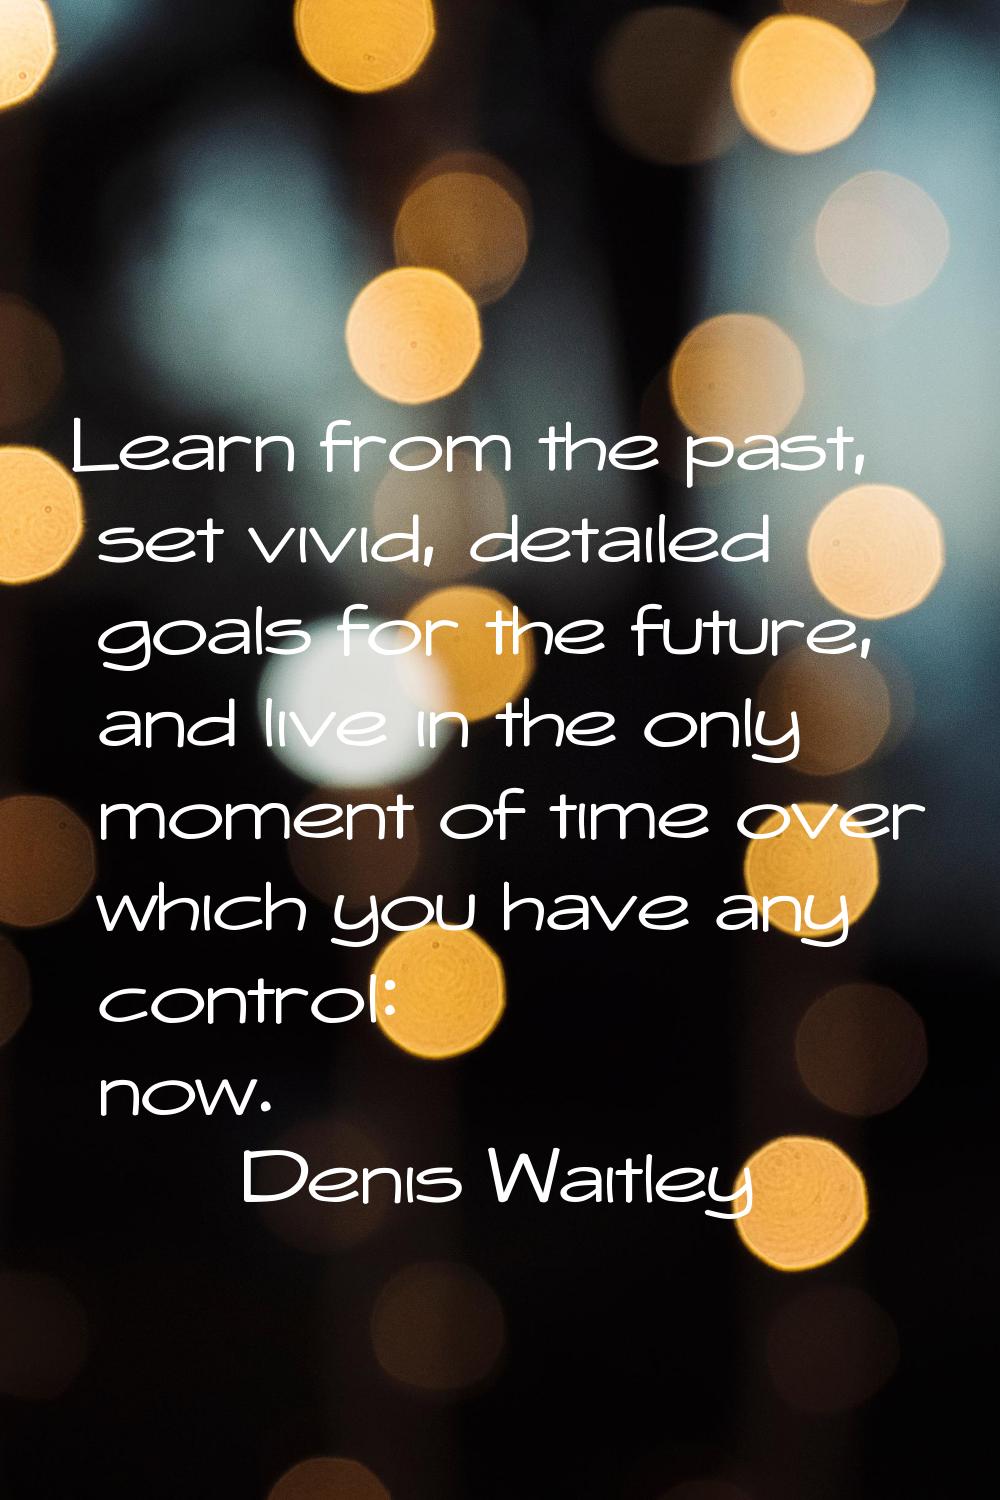 Learn from the past, set vivid, detailed goals for the future, and live in the only moment of time 